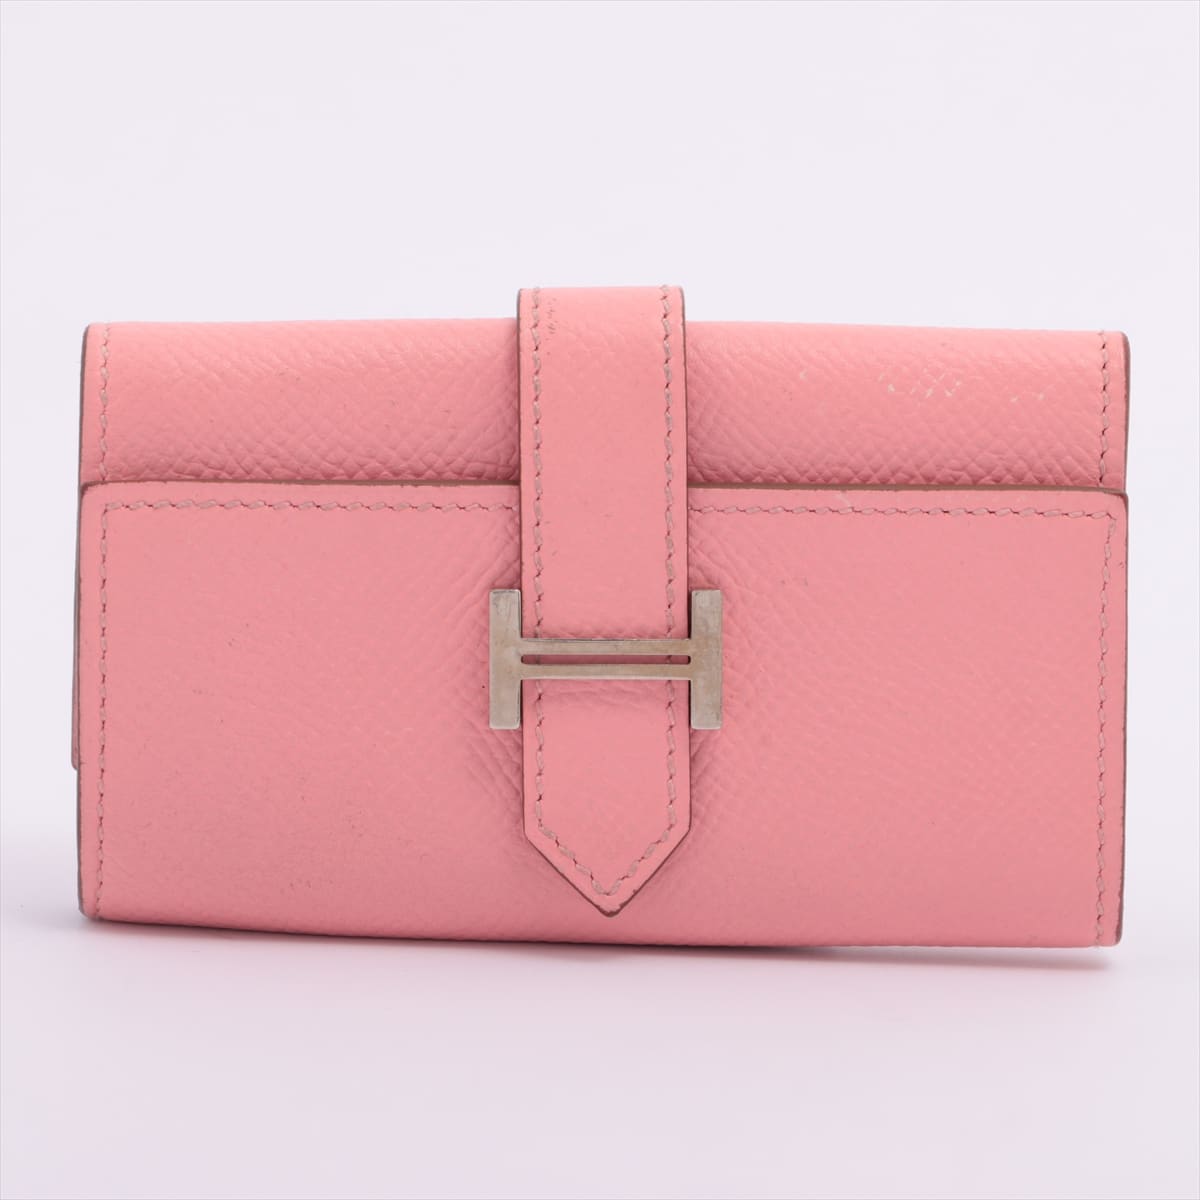 Hermès Bearn Key Case Veau Epsom Key Case Pink Silver Metal fittings X: 2016 The tip of the strap is peeled off